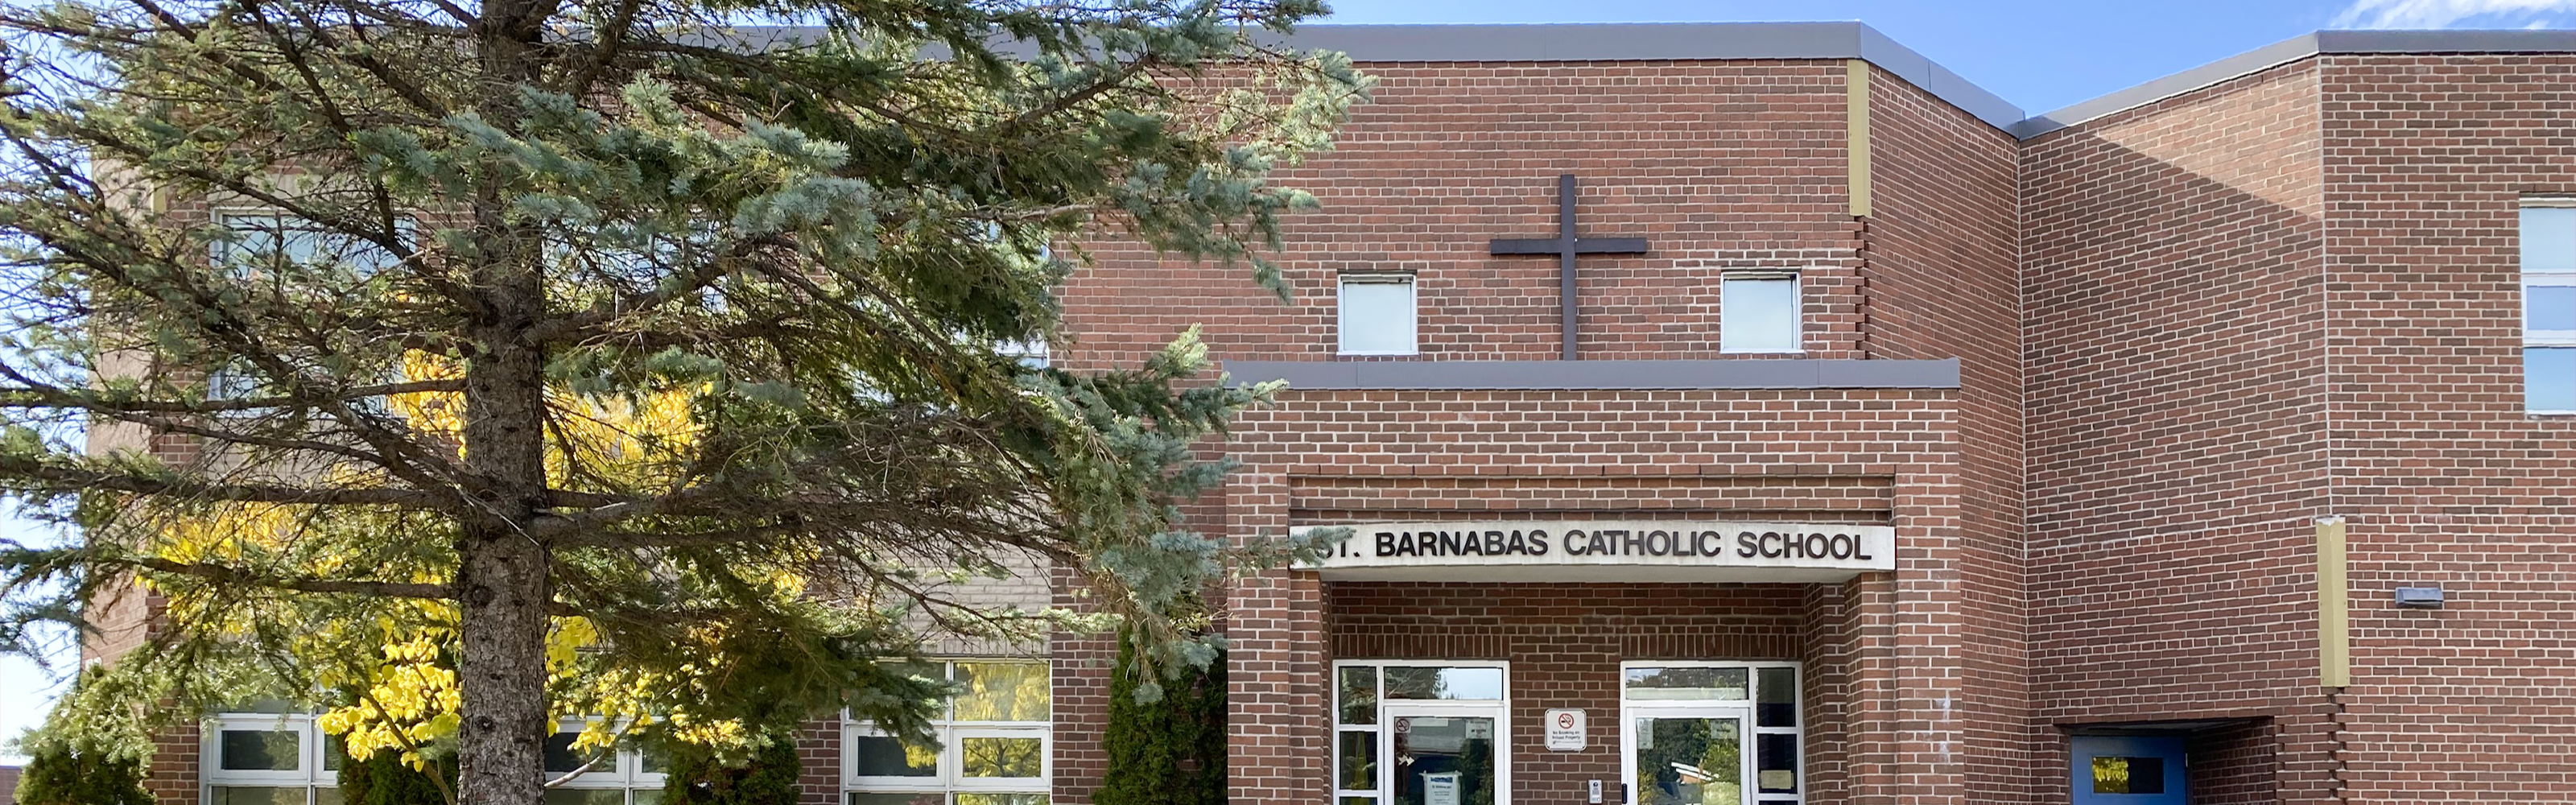 The front of the St. Barnabas Catholic School building.